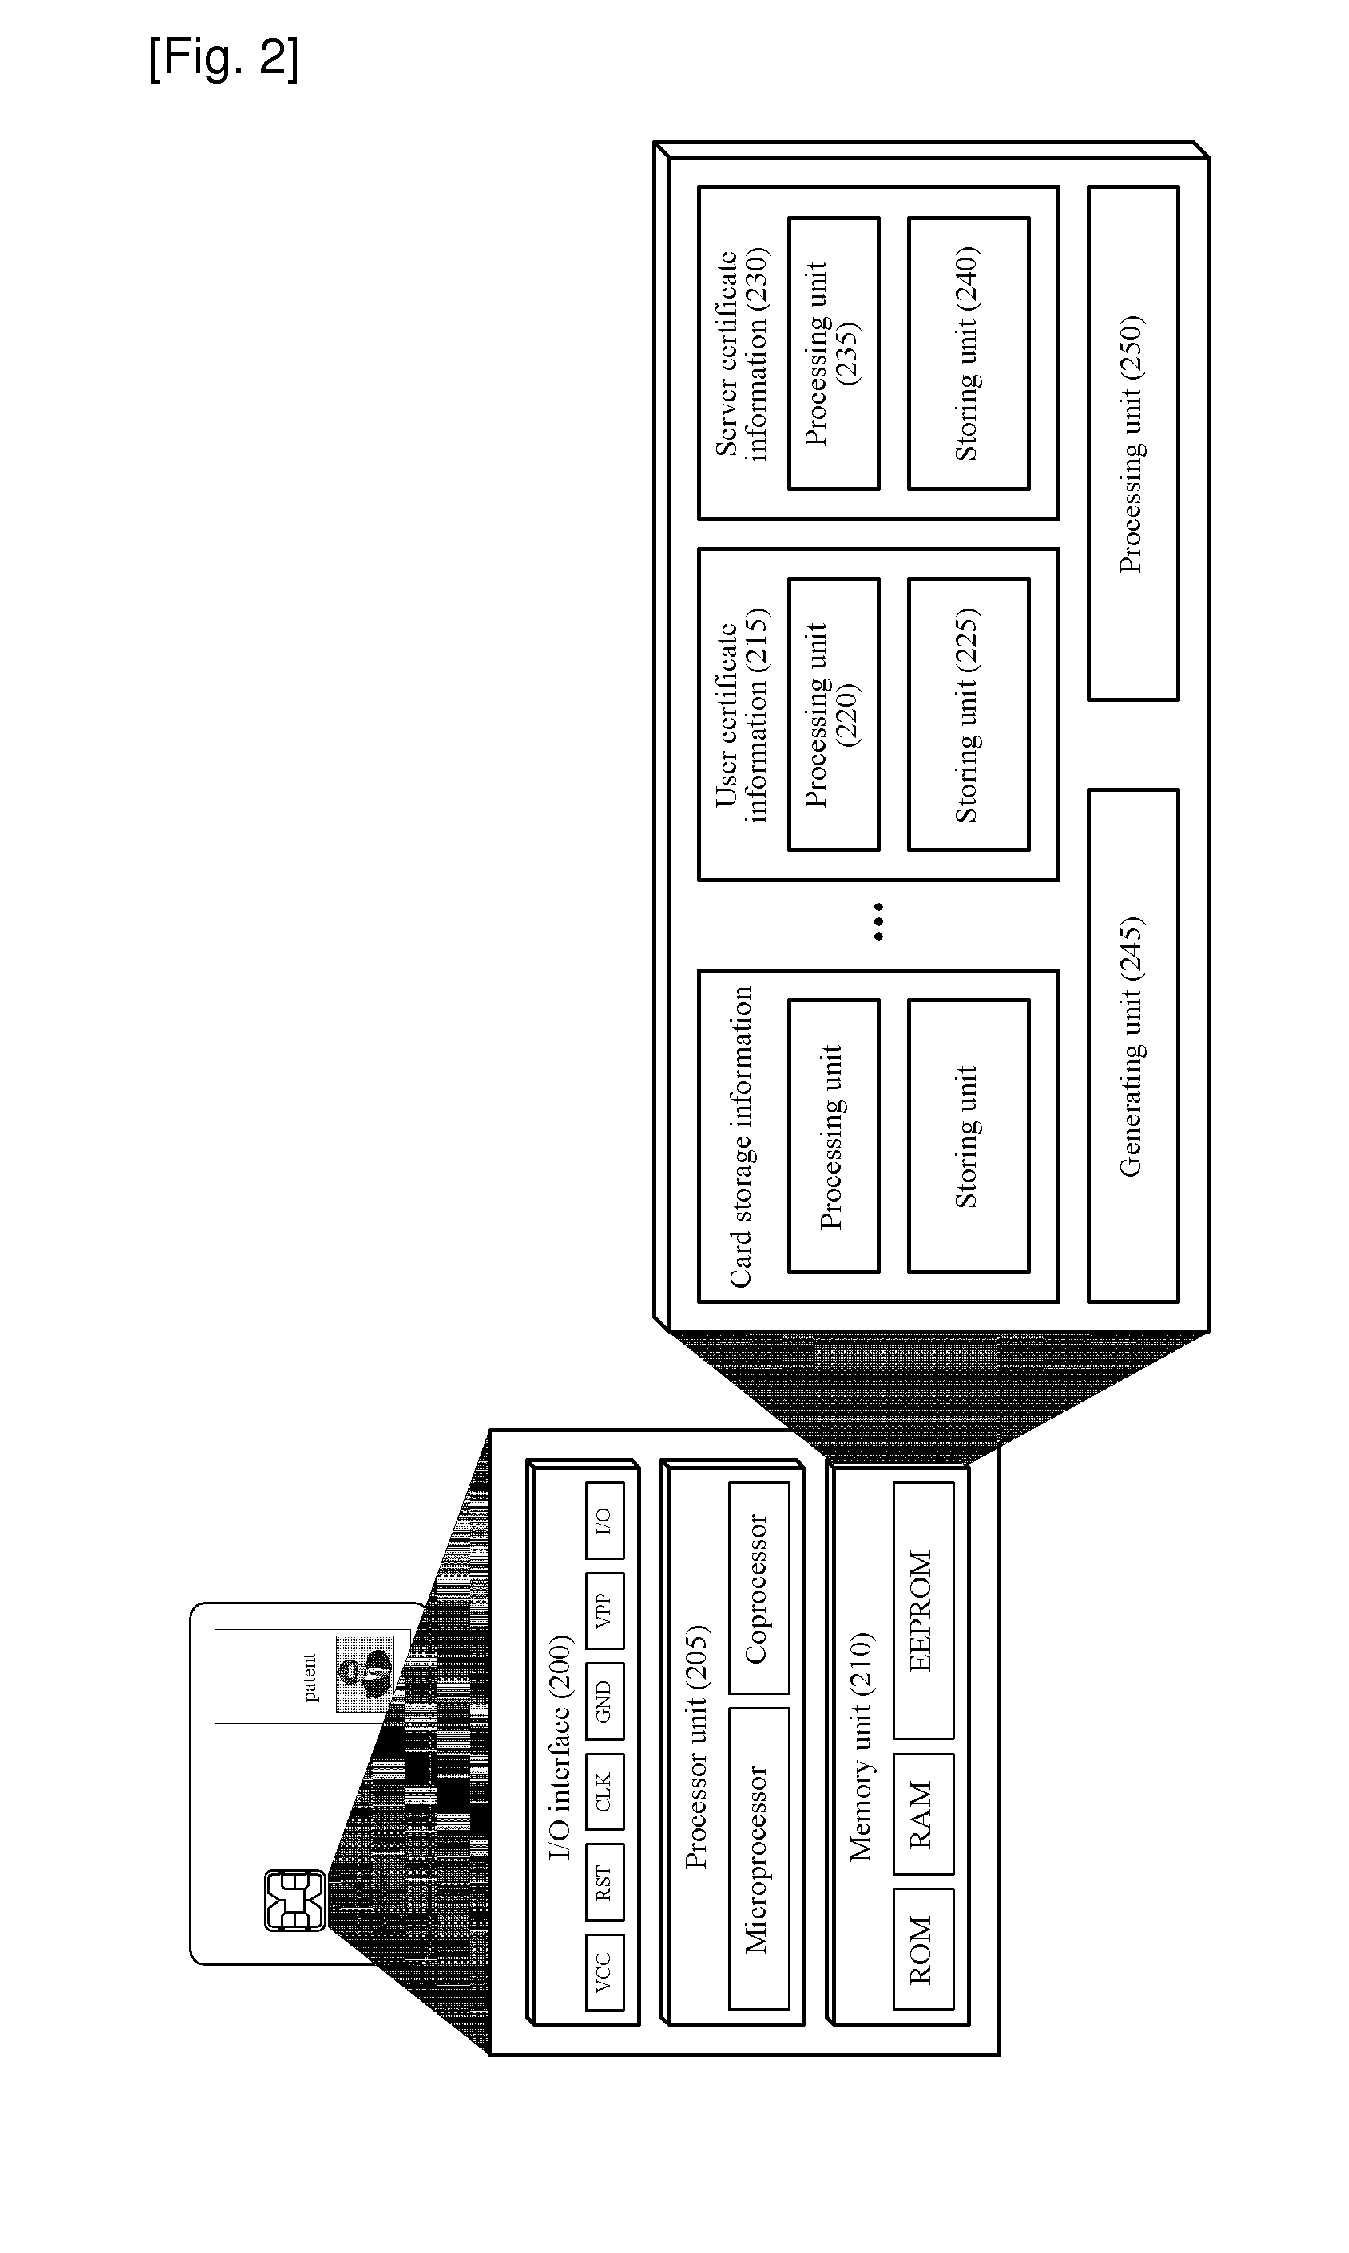 System and Method for Operating End-to-End Security Channel Between Server and IC Card